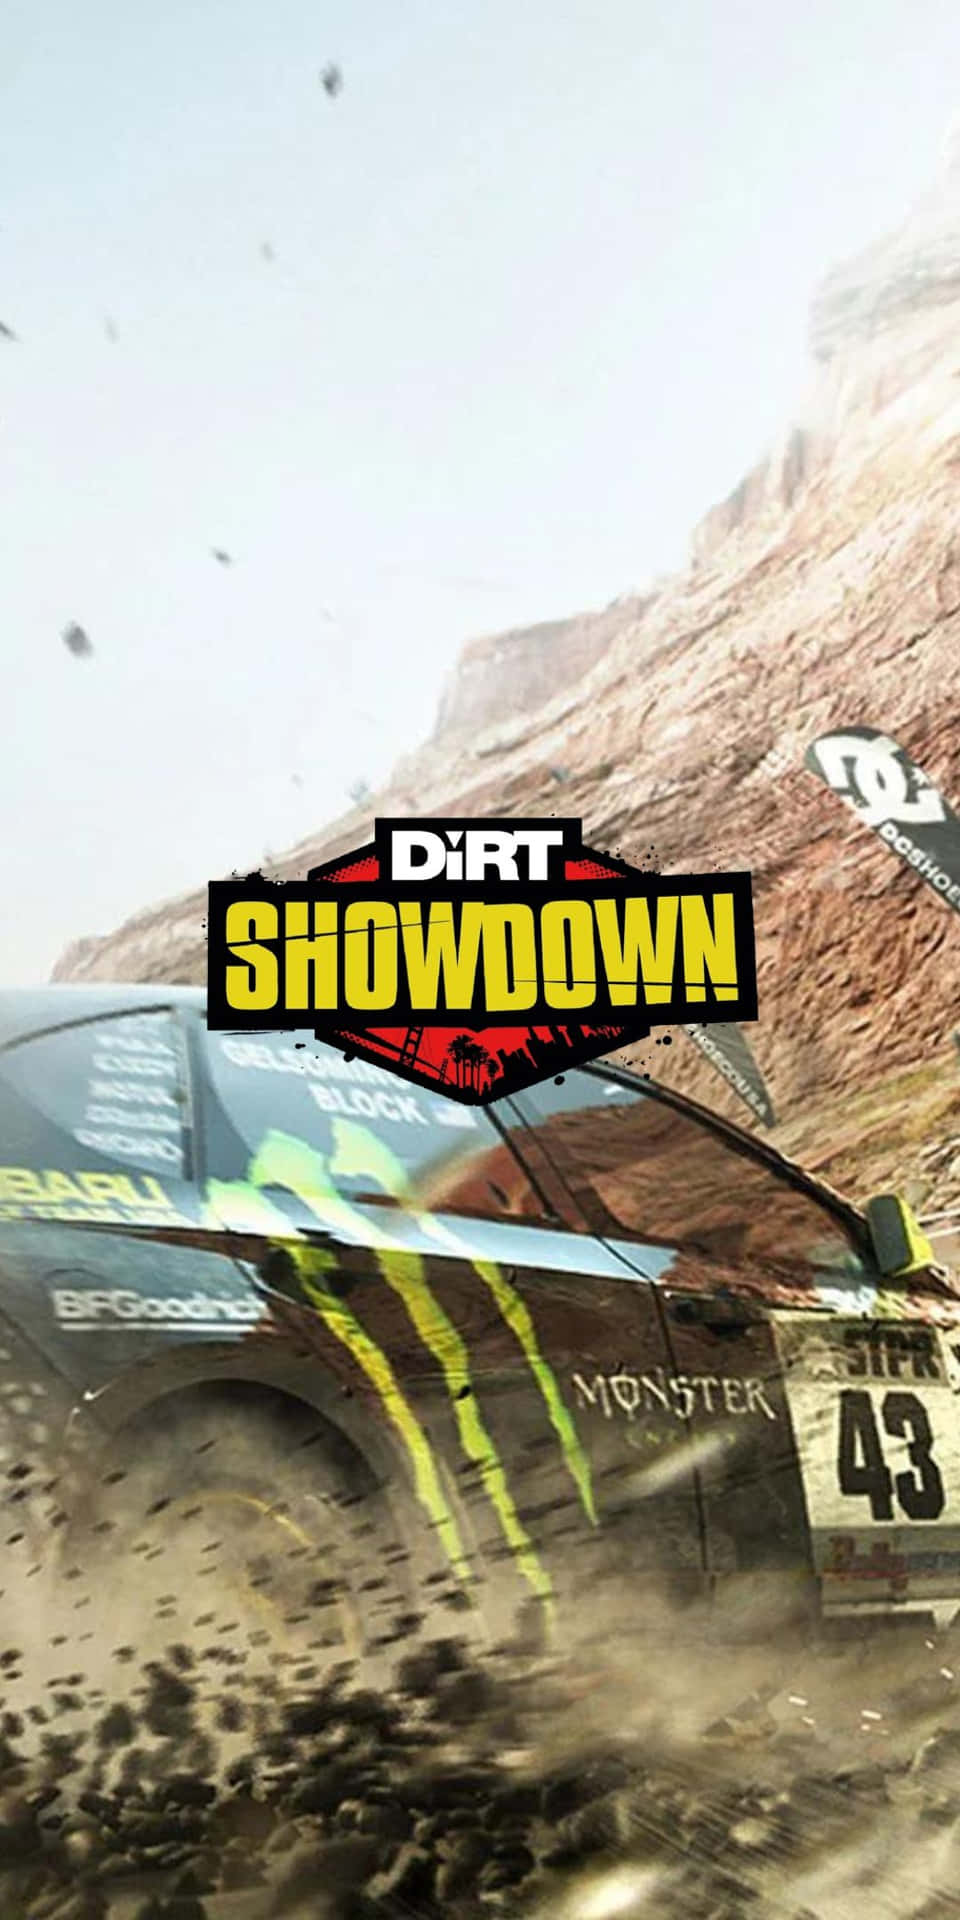 "Feel the thrill of speed and dust with Pixel 3 Dirt Showdown"